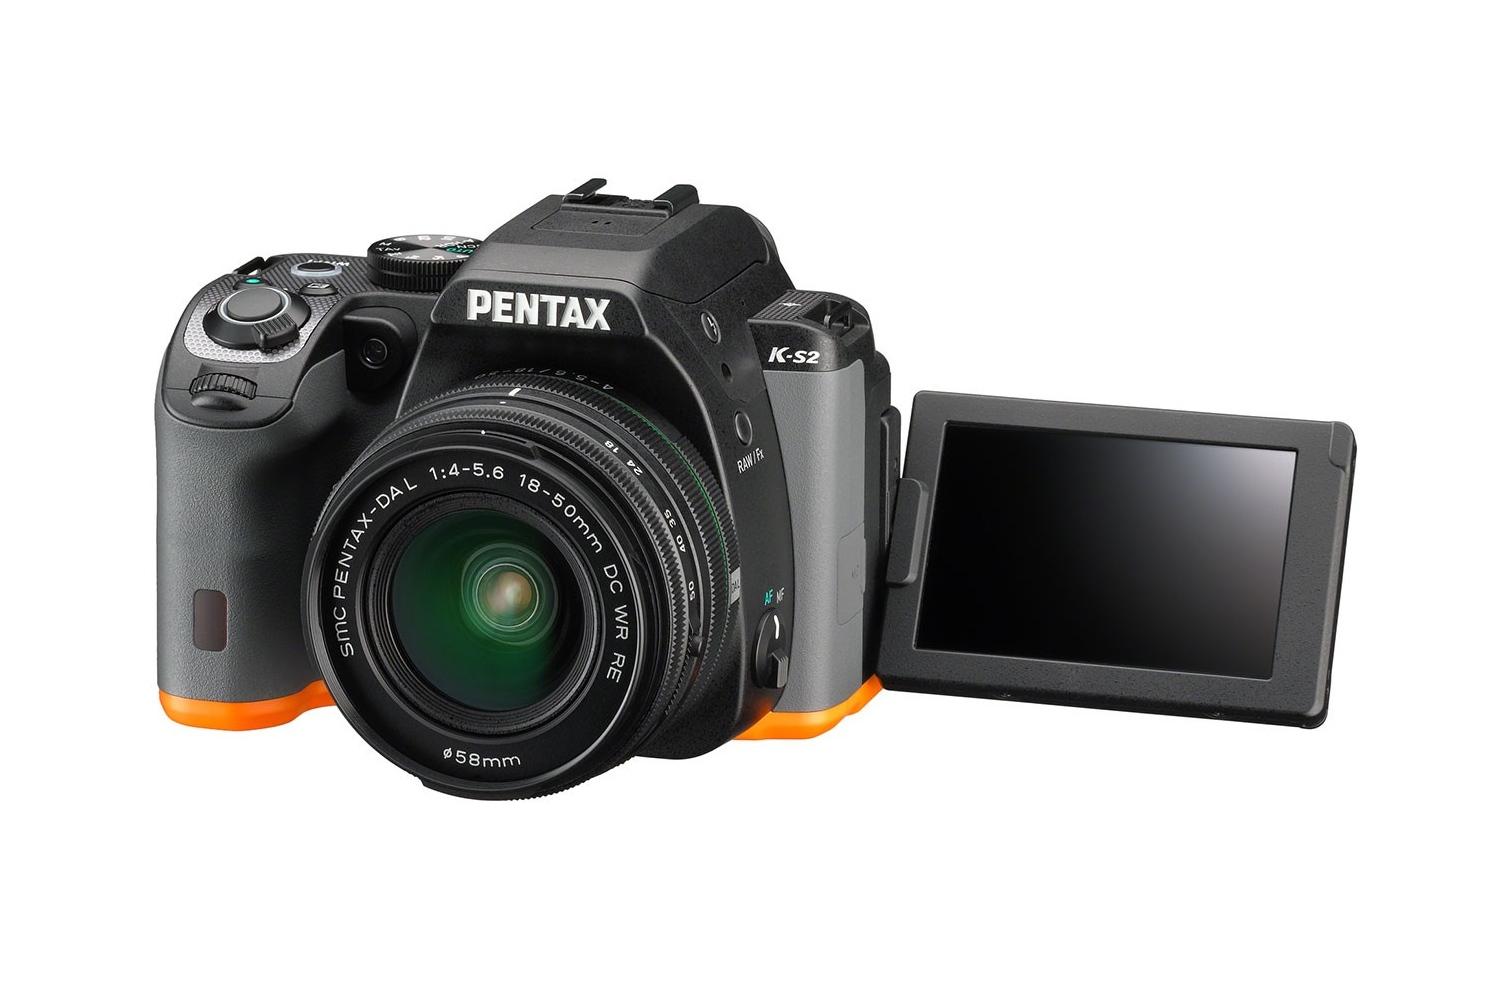 ricoh launches new k s2 dslr wg 5 rugged compact march 2015 pentax ks2 7